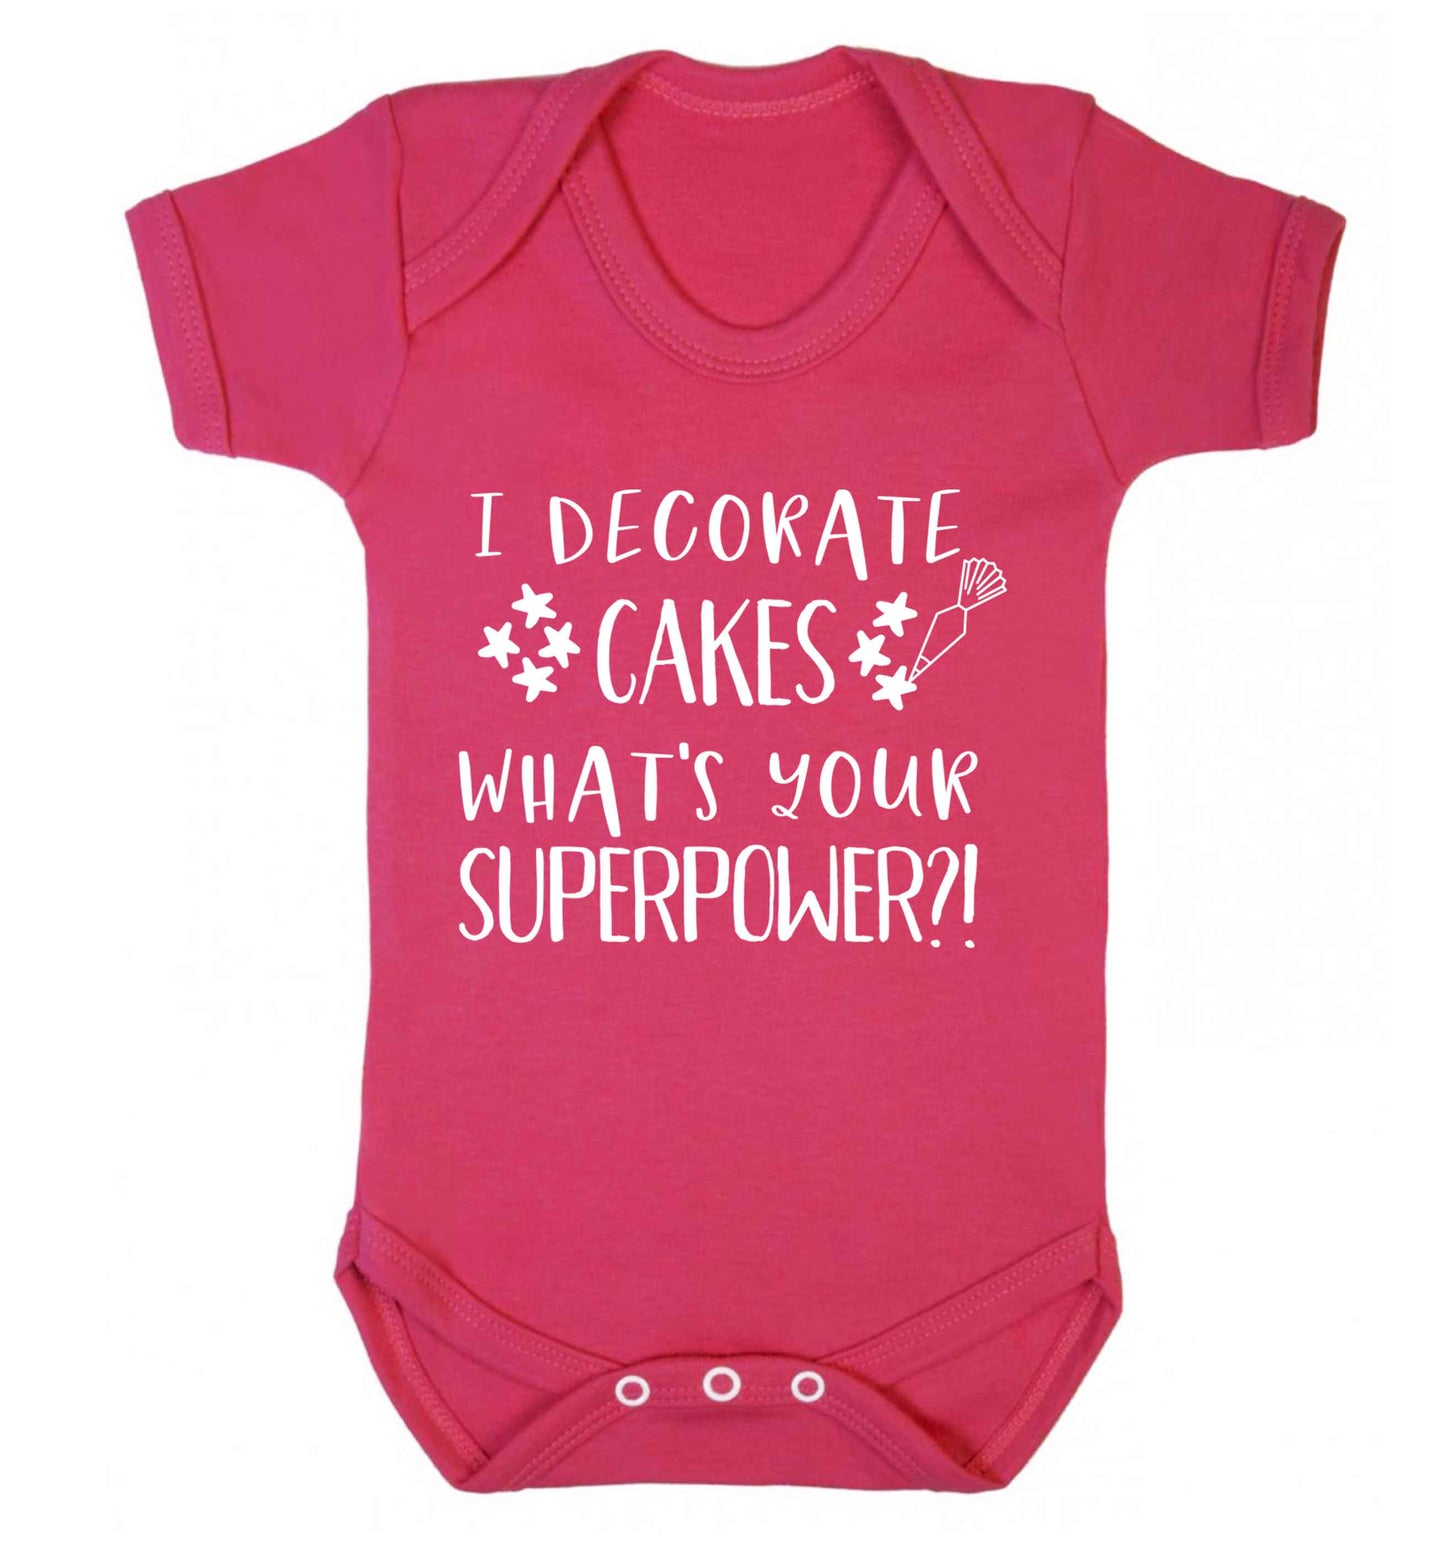 I decorate cakes what's your superpower?! Baby Vest dark pink 18-24 months